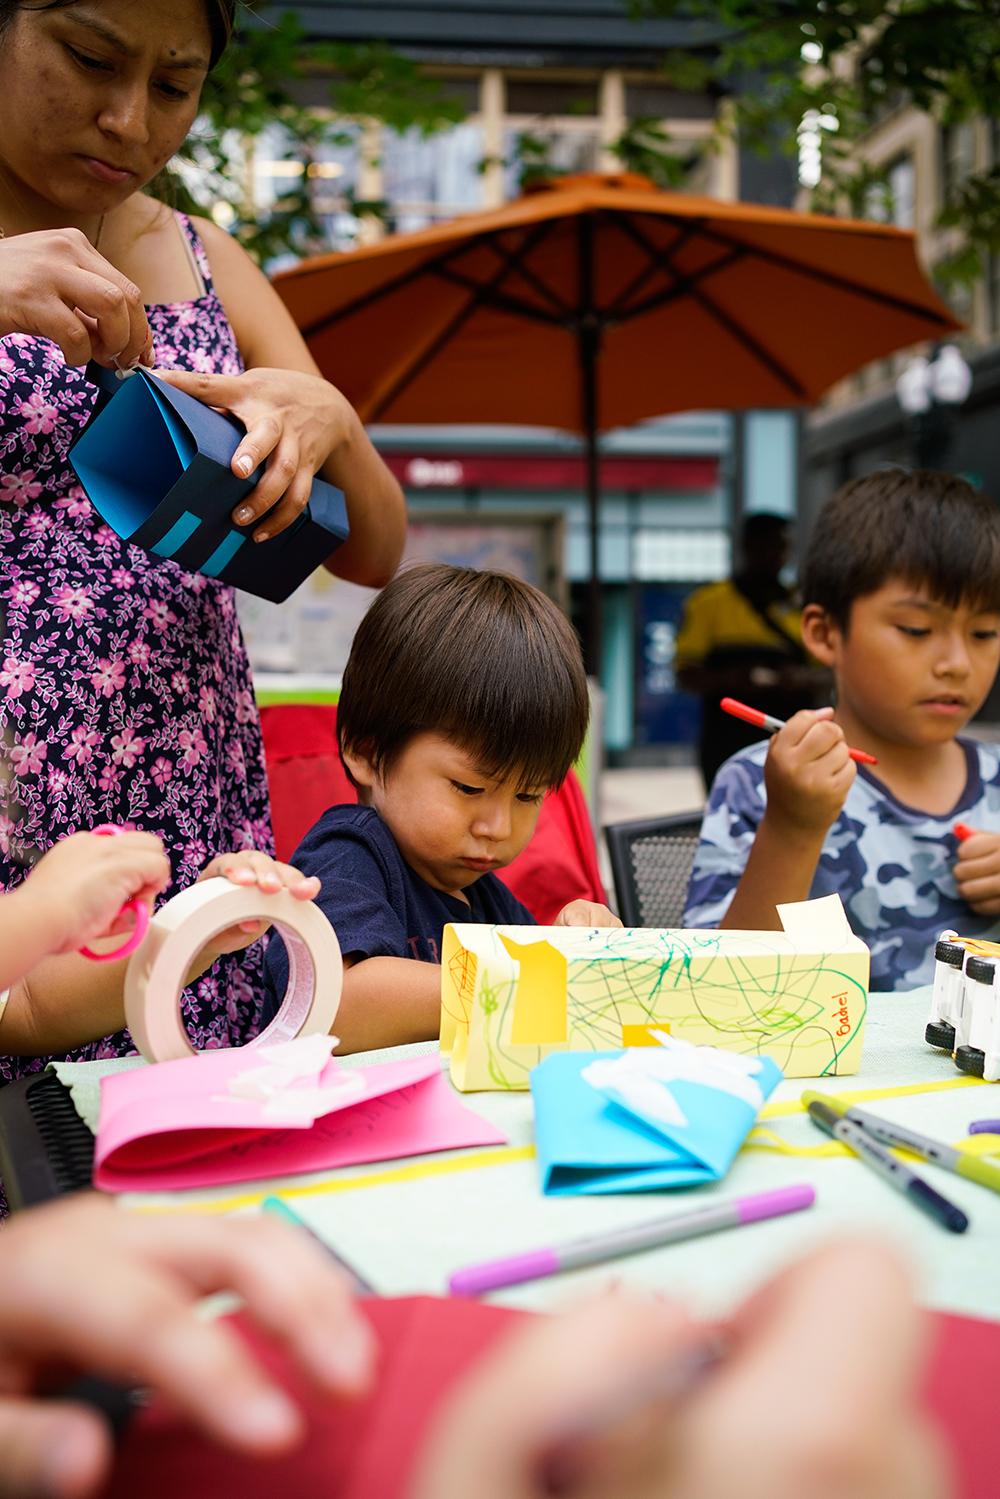 Young Asian boys sit at a table and make crafts.